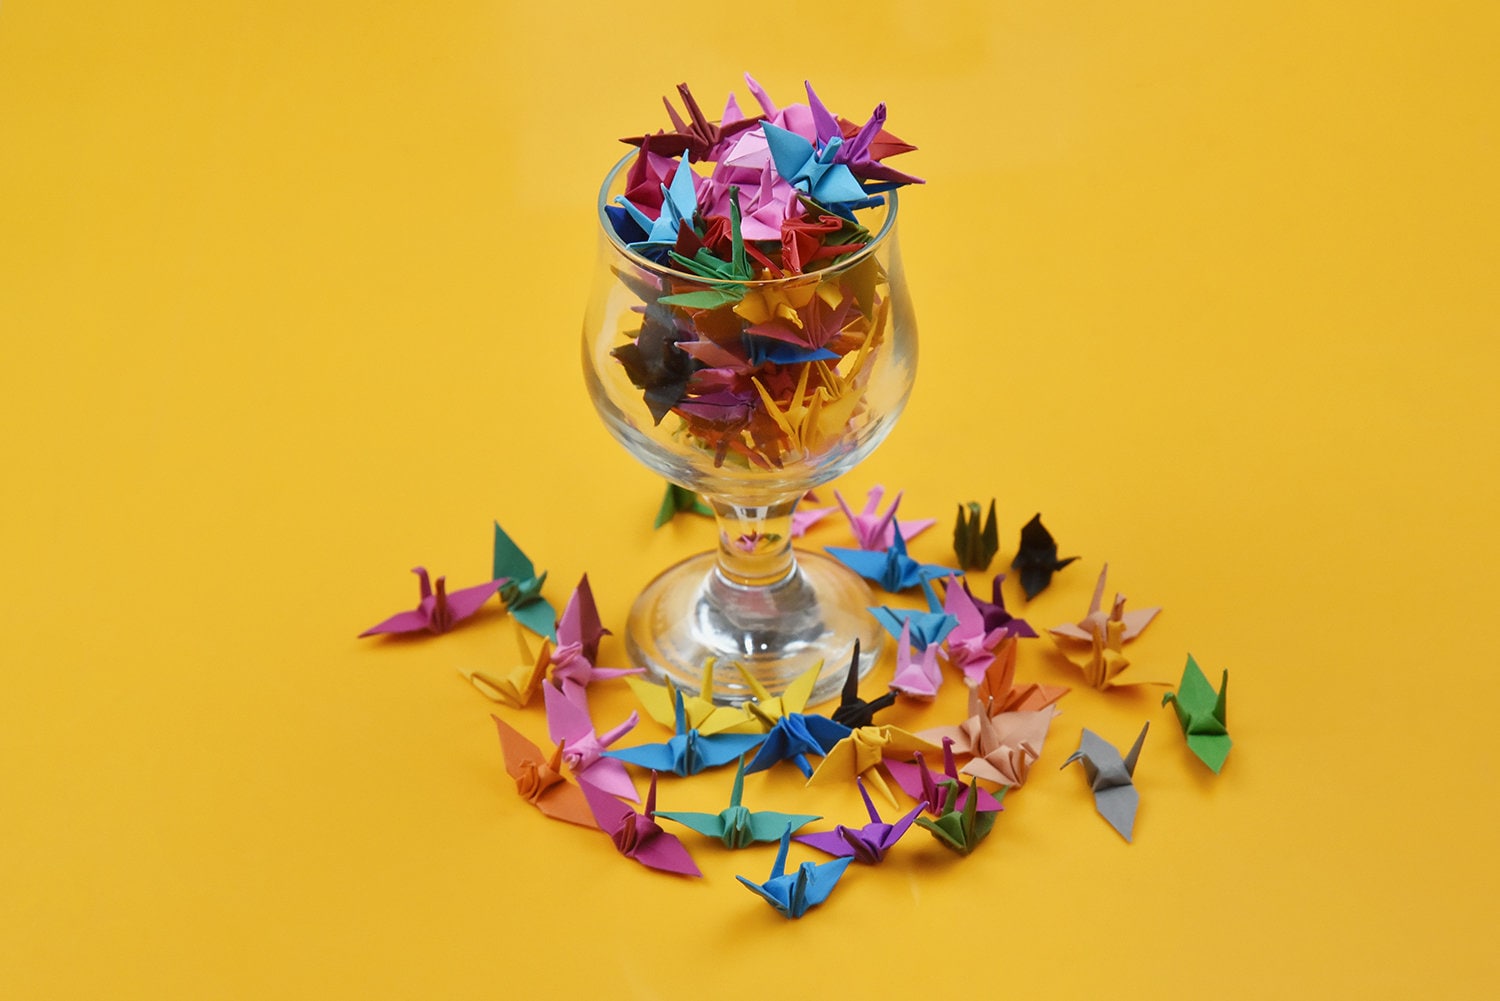 1000 Rainbow Color Origami Paper Crane Made of 3.81cm (1.5 inches)